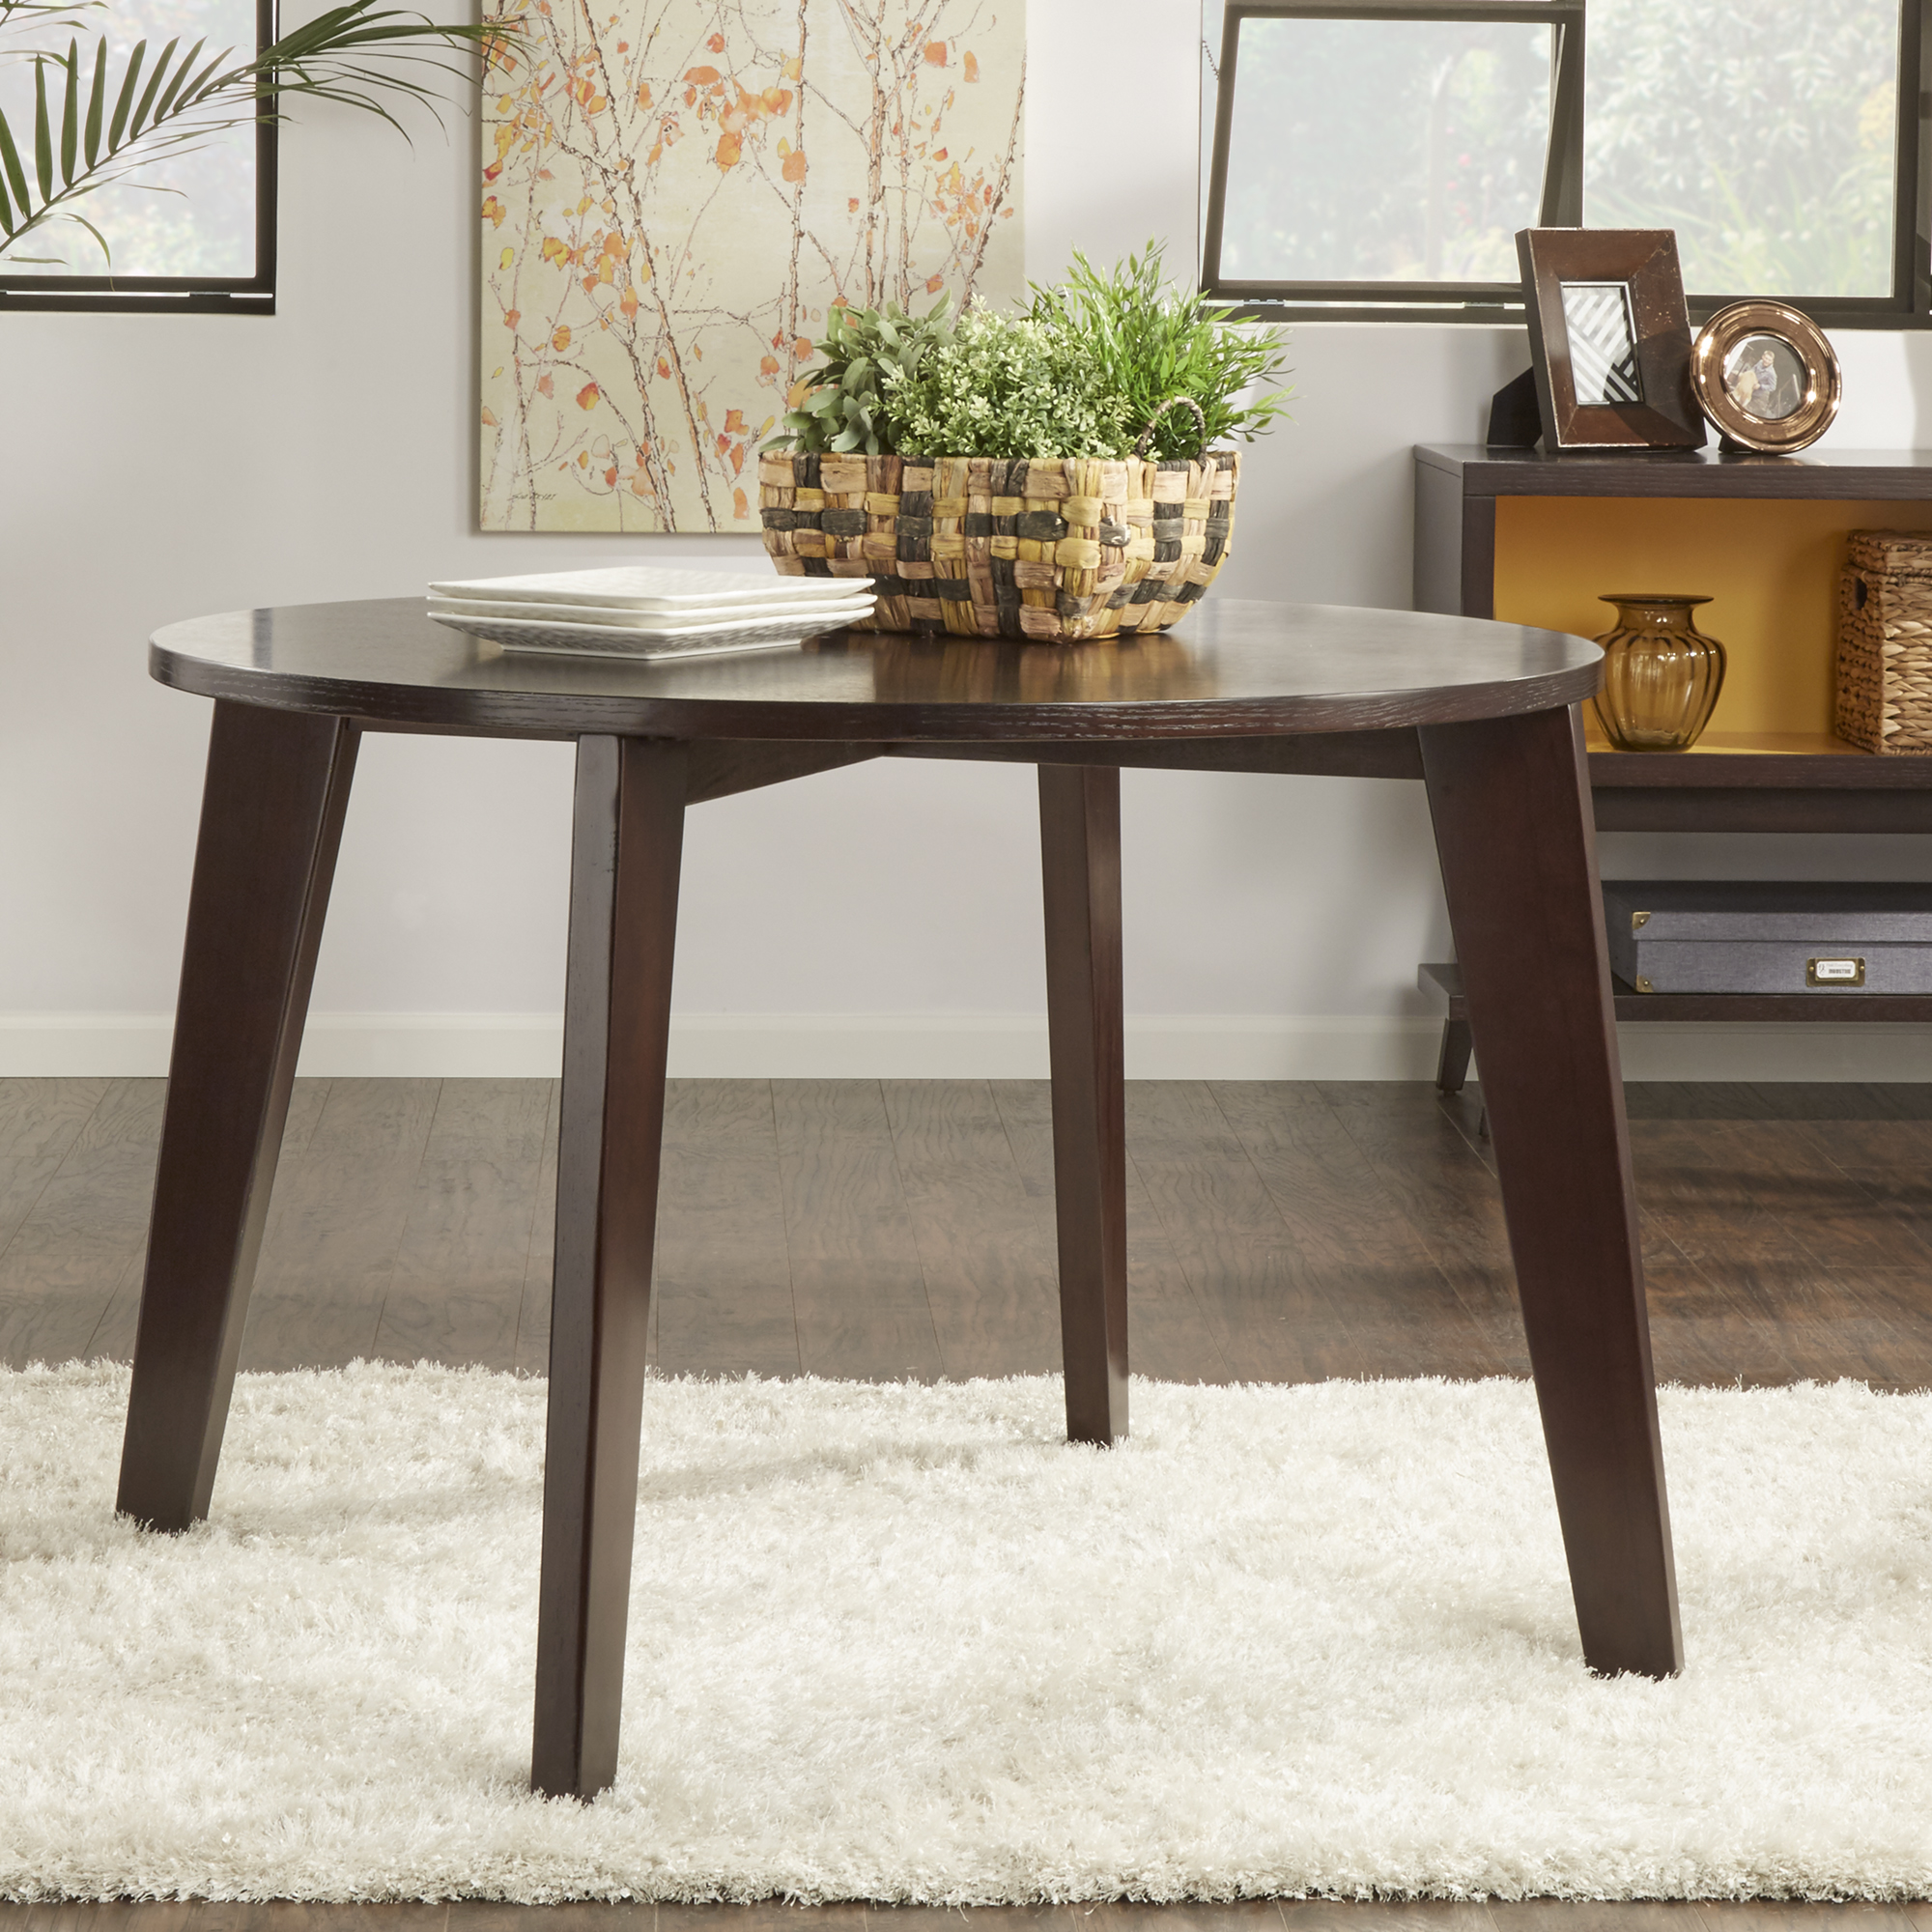 Angled Leg Round Dining Table